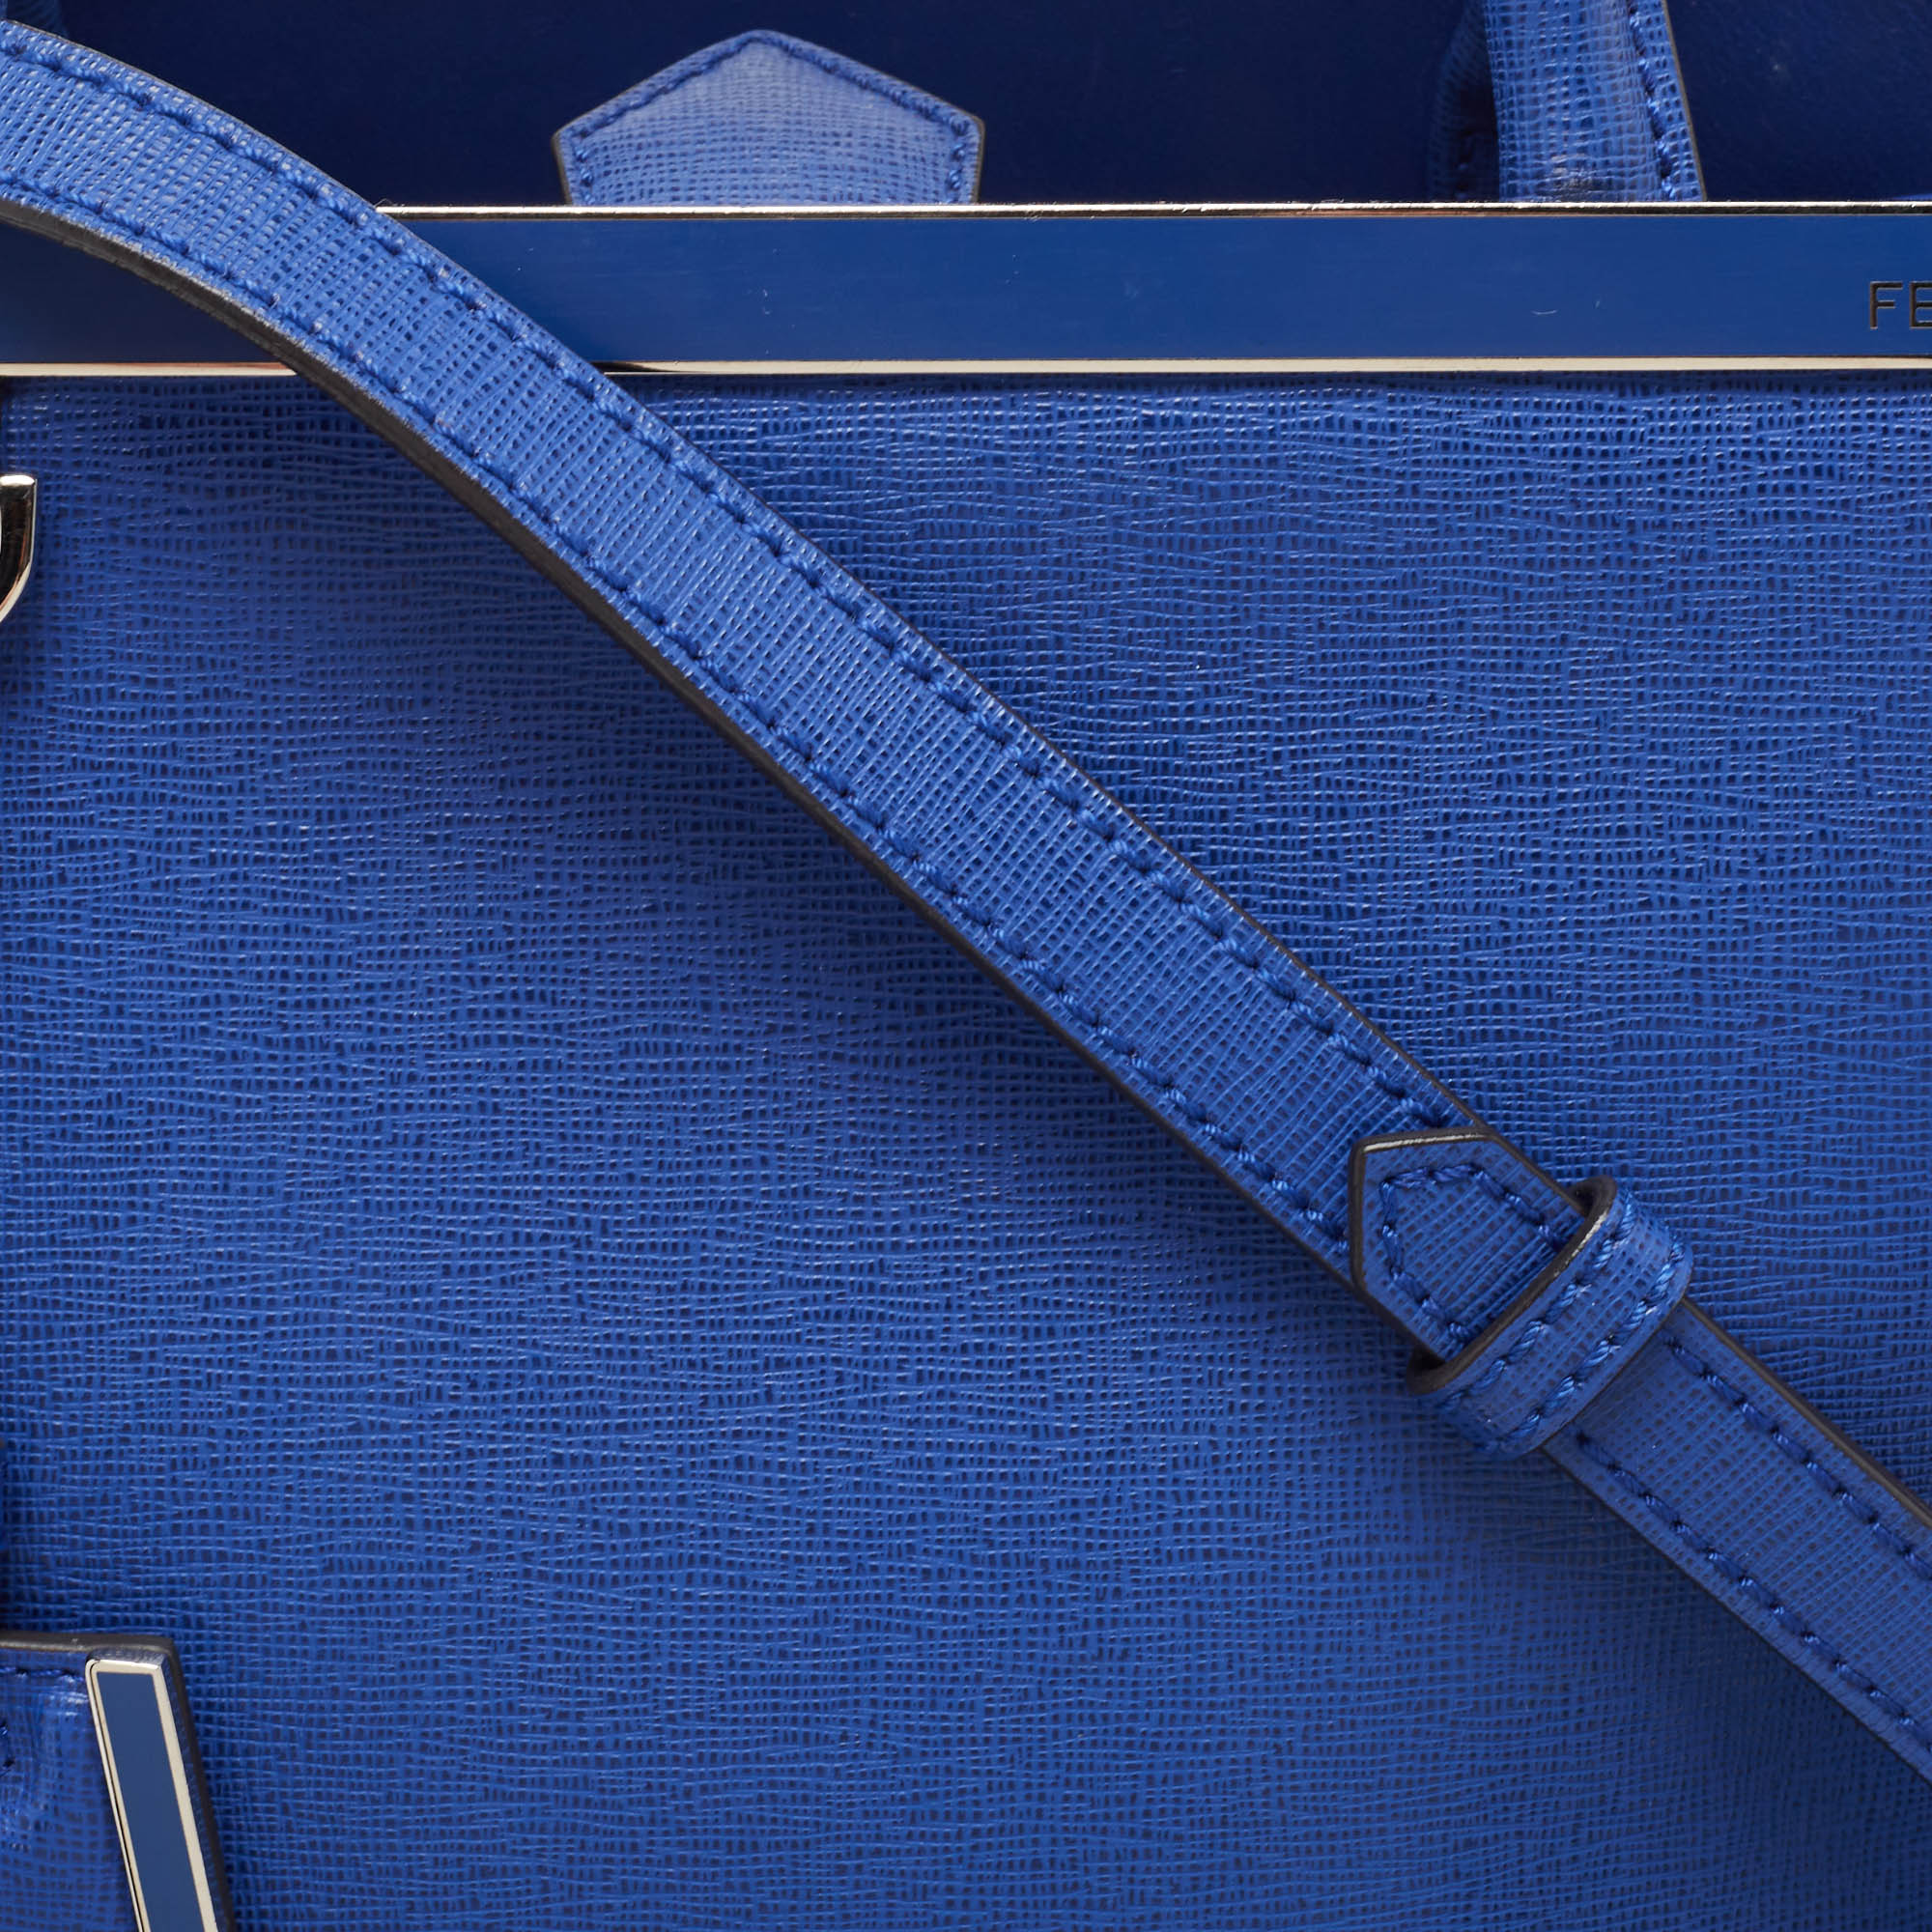 Fendi Blue Leather Small 2Jours Tote